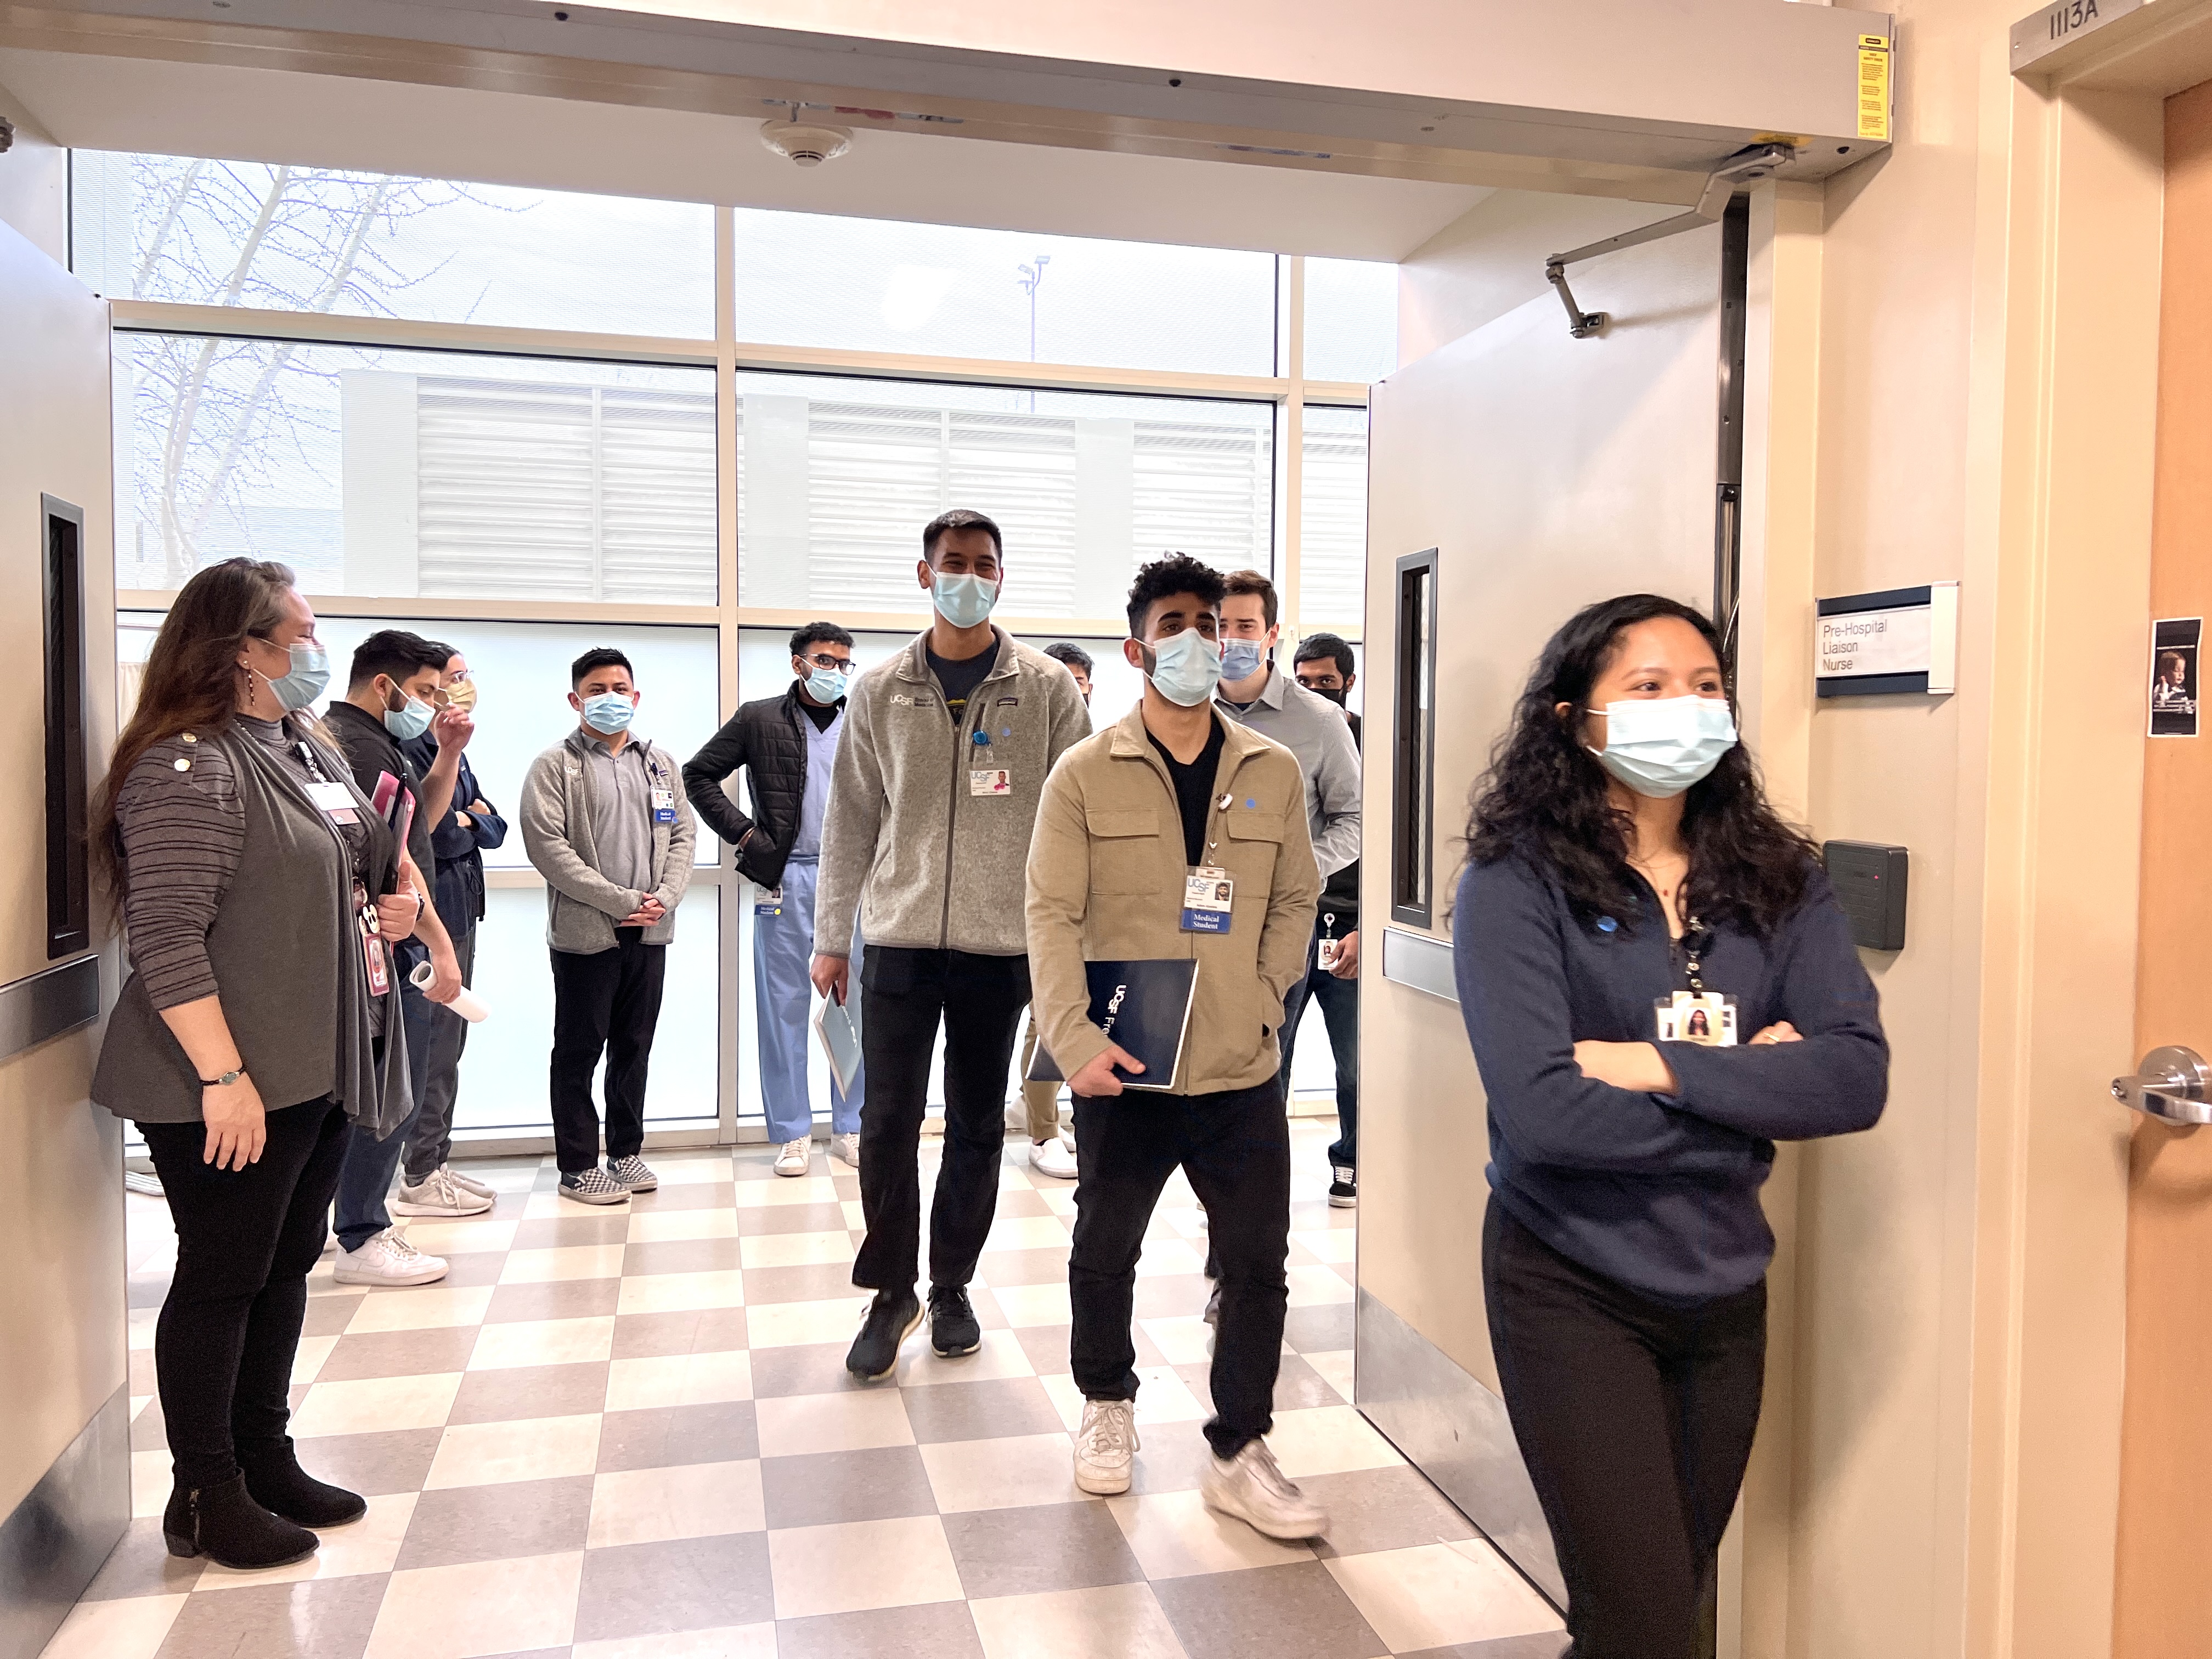 Group of medical students walking into a building hallway